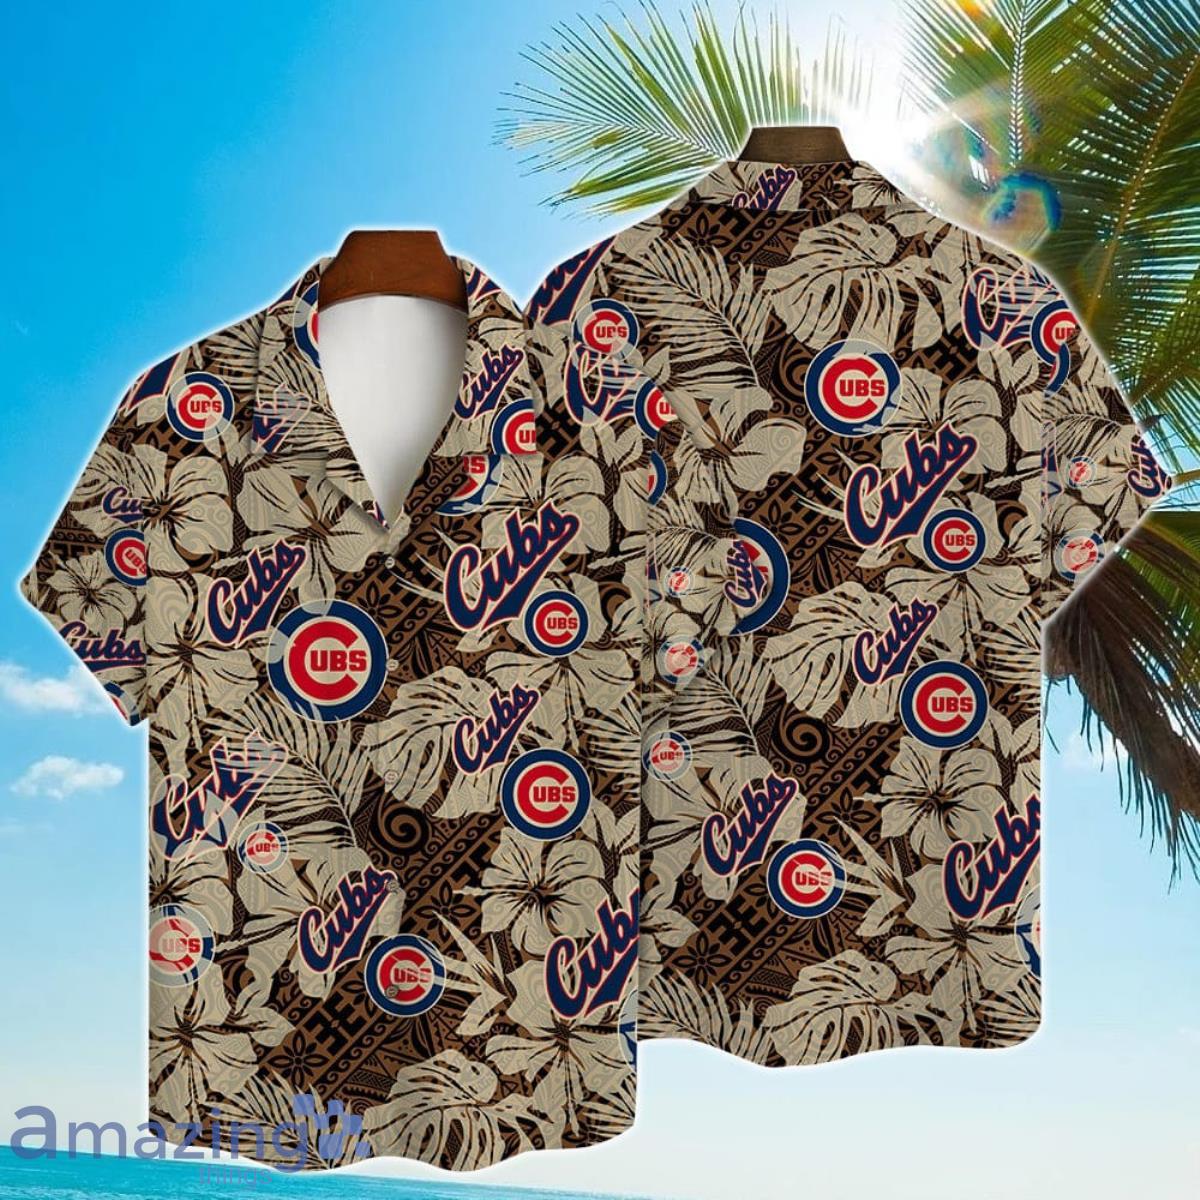 Chicago Cubs Deals, Clearance Cubs Apparel, Discounted Cubs Gear